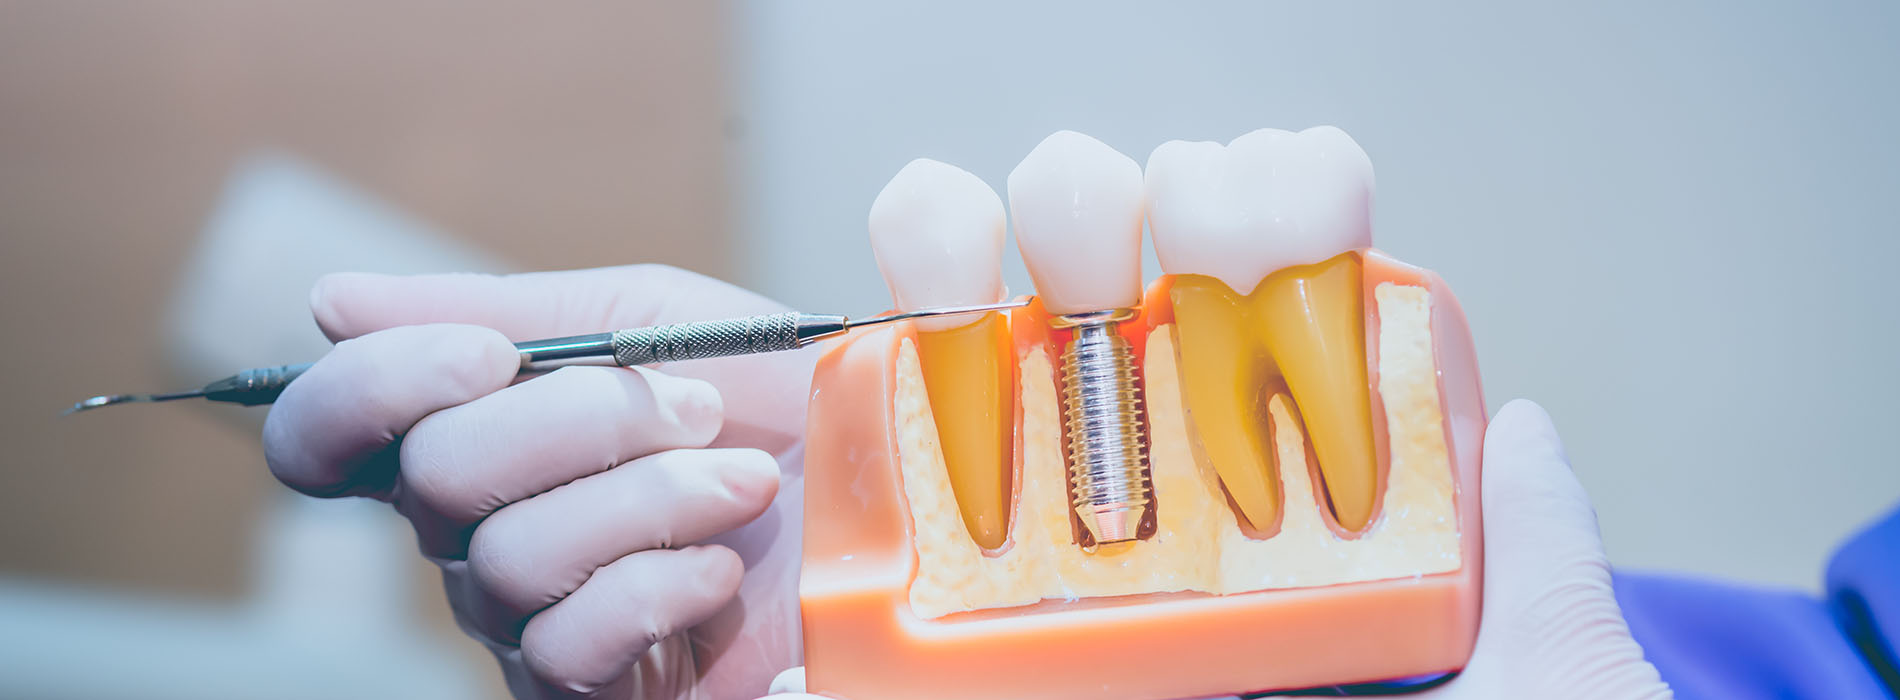 Astoria Modern Family Dental | Inlays  amp  Onlays, Root Canals and Emergency Treatment